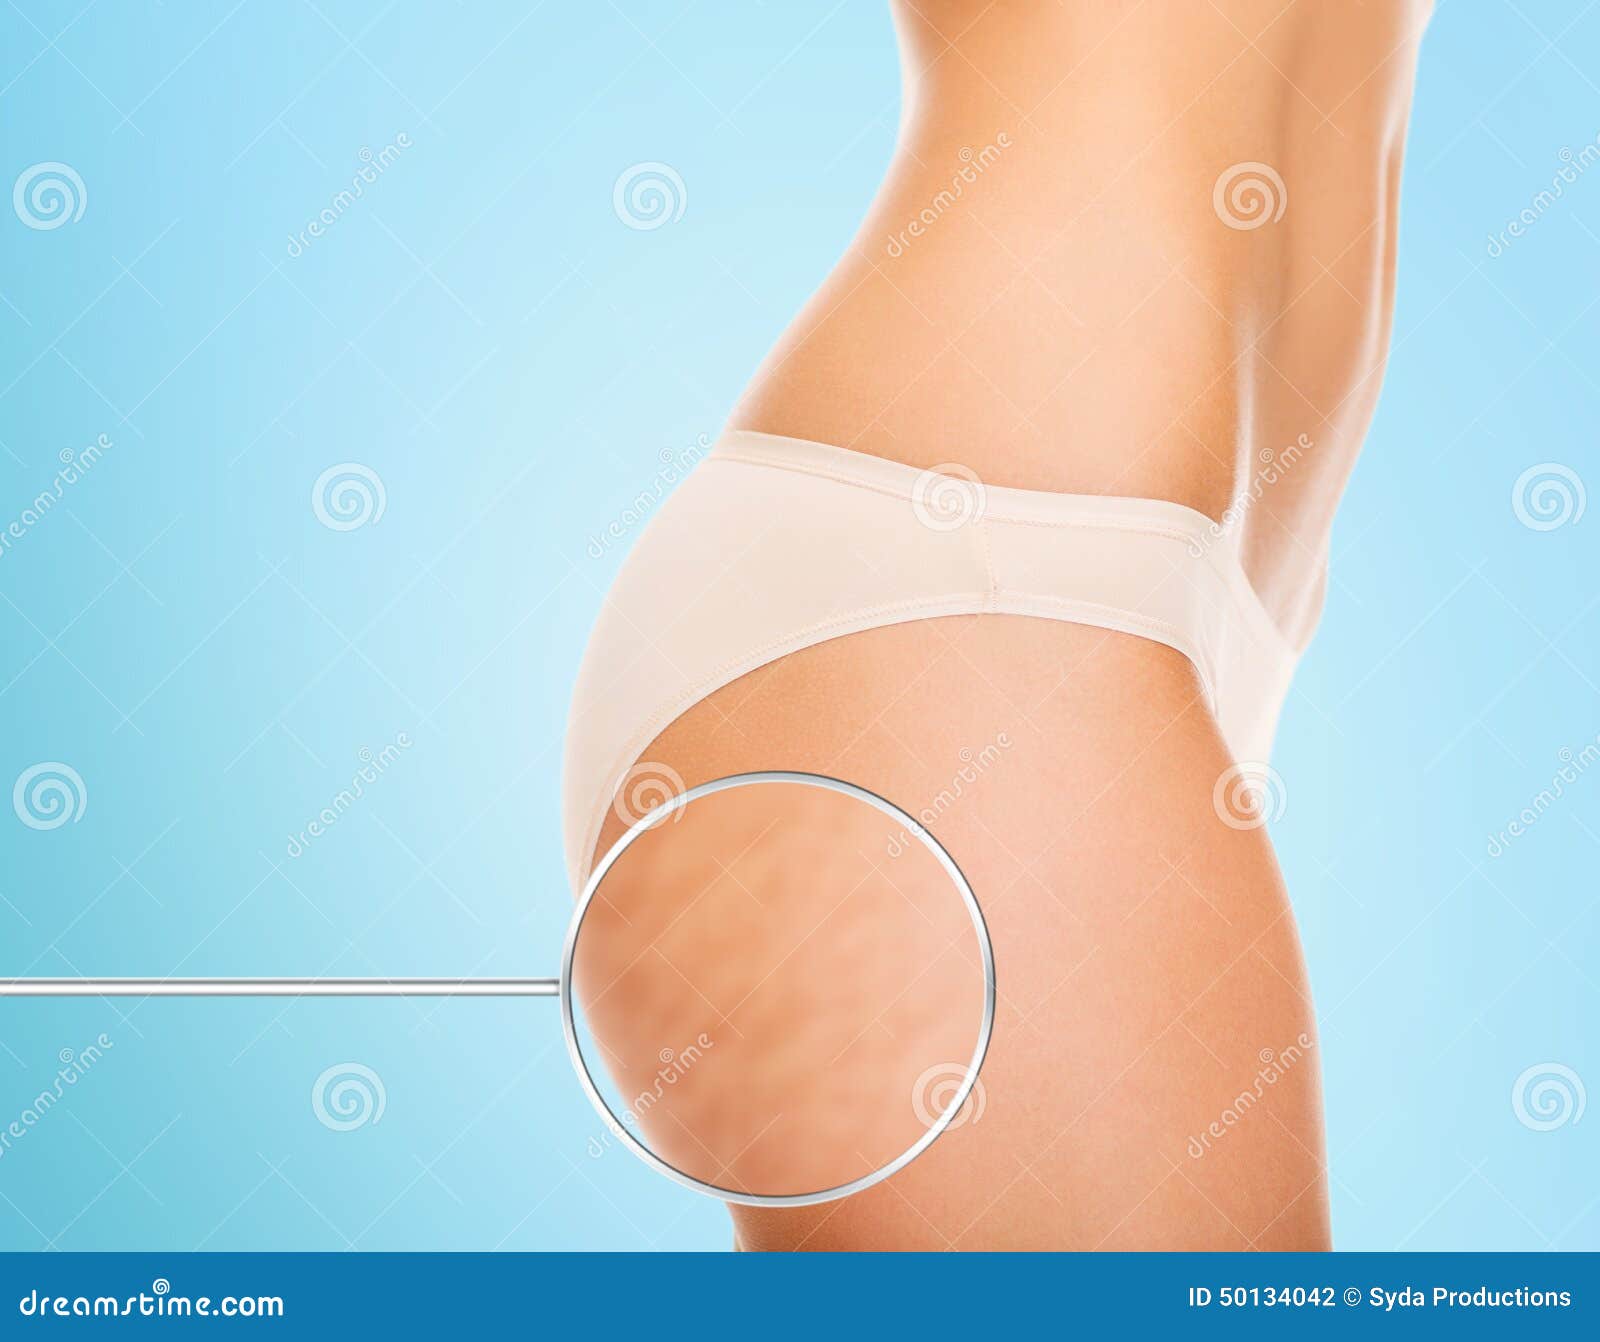 https://thumbs.dreamstime.com/z/close-up-woman-buttocks-cellulite-health-people-bodycare-beauty-concept-magnifier-over-blue-background-50134042.jpg